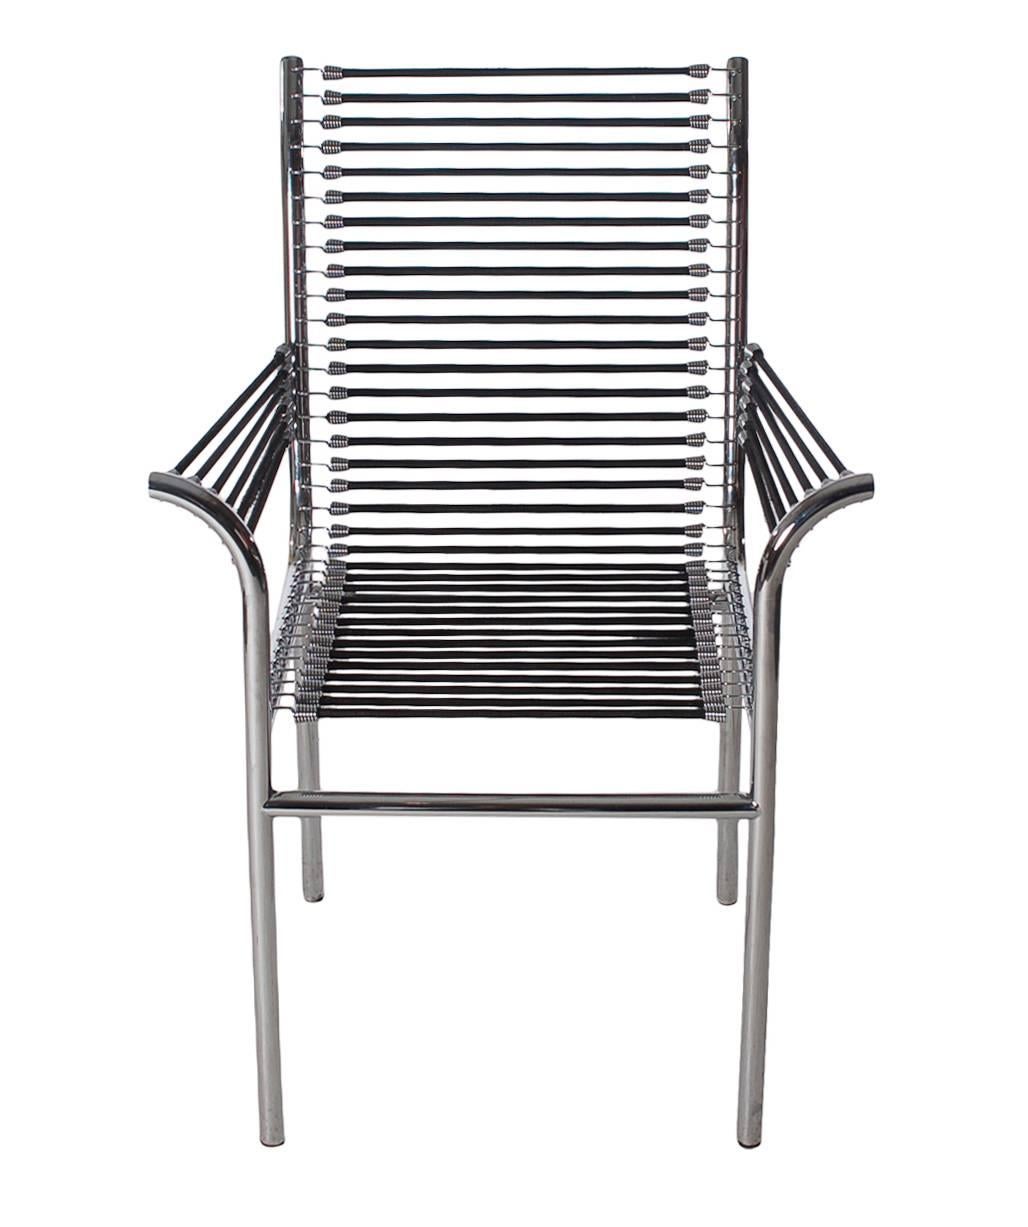 1980s edition of the Sandows chair designed by Rene´ Herbst. An iconic Classic from the Bauhaus period. The feature polished stainless frames with elasticated cords. Plenty of extra cords included with the chairs.